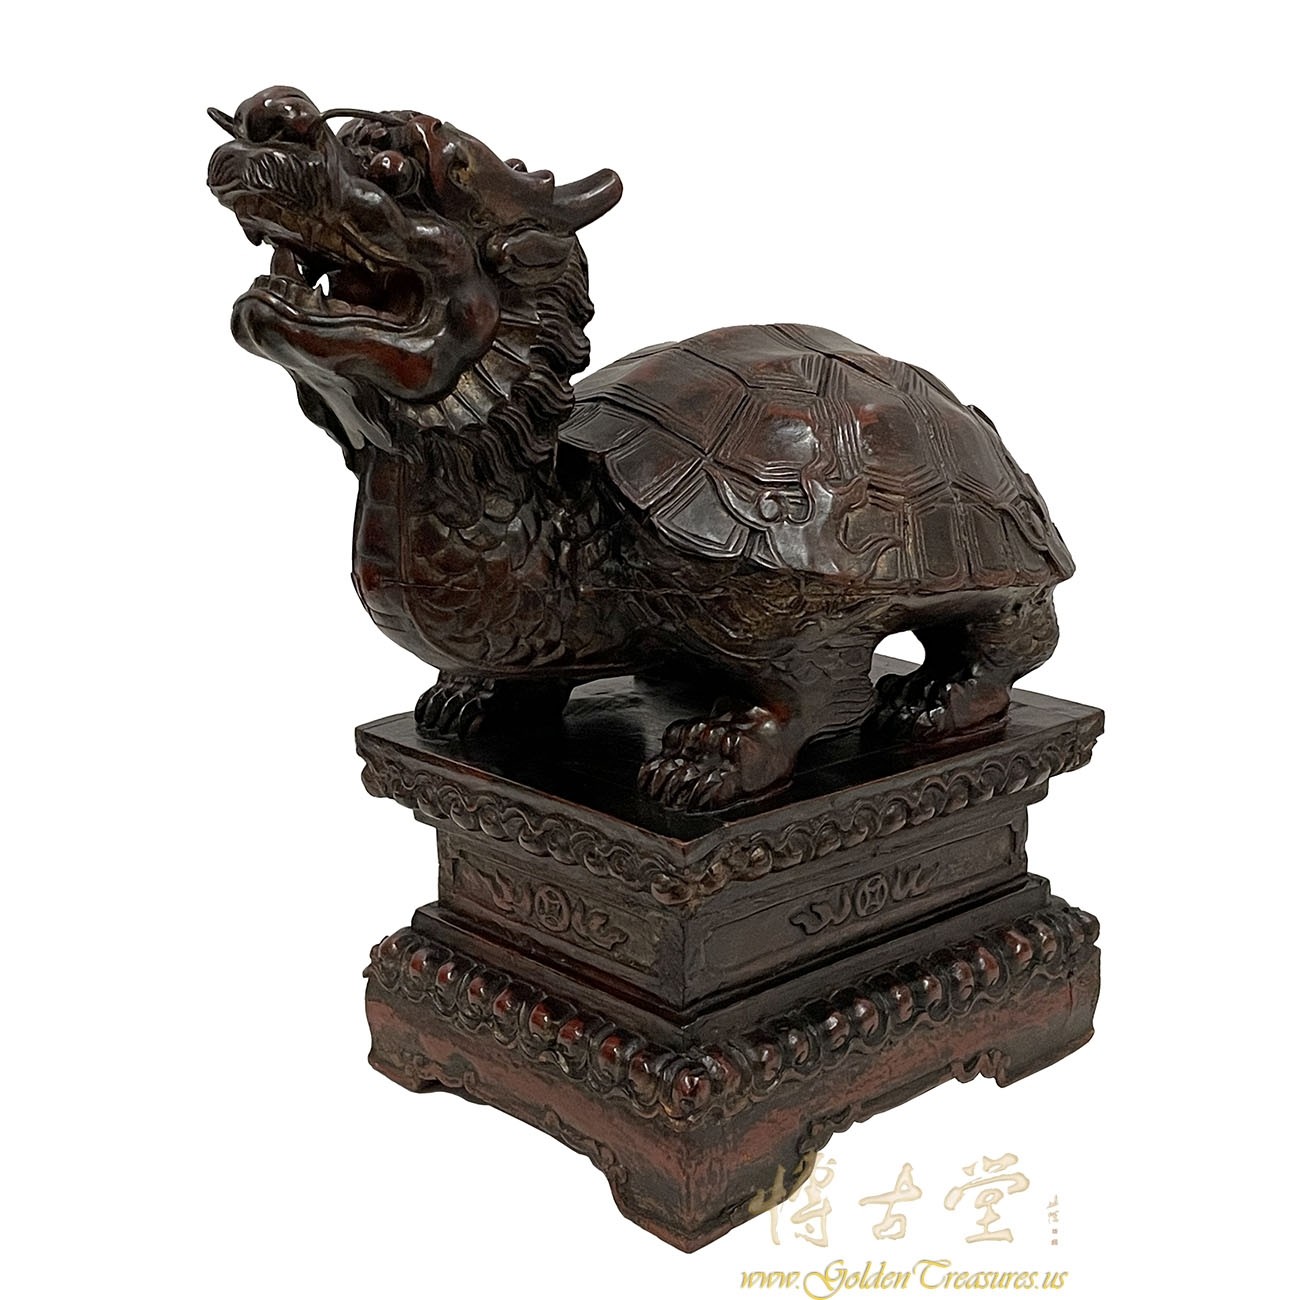 Antique Chinese Wooden Carved Dragon Turtle Sculpture 